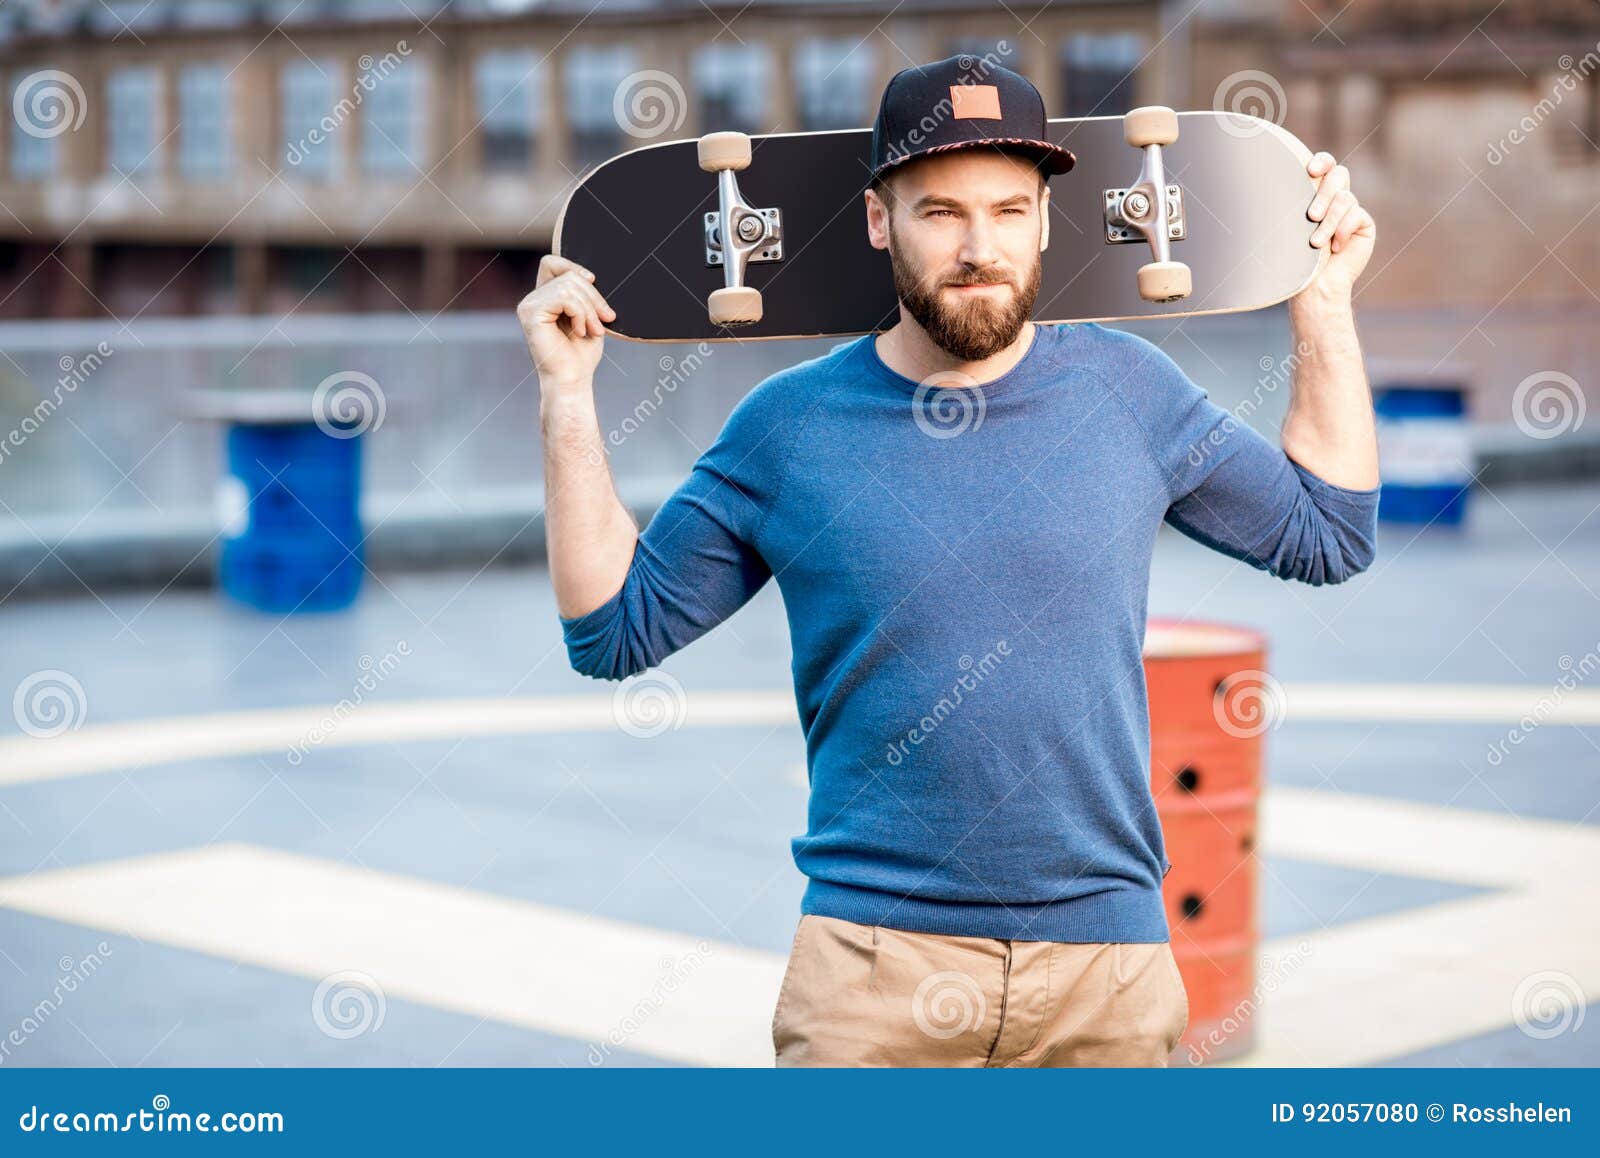 Portrait of a Man with Skateboard Stock Photo - Image of teenage ...